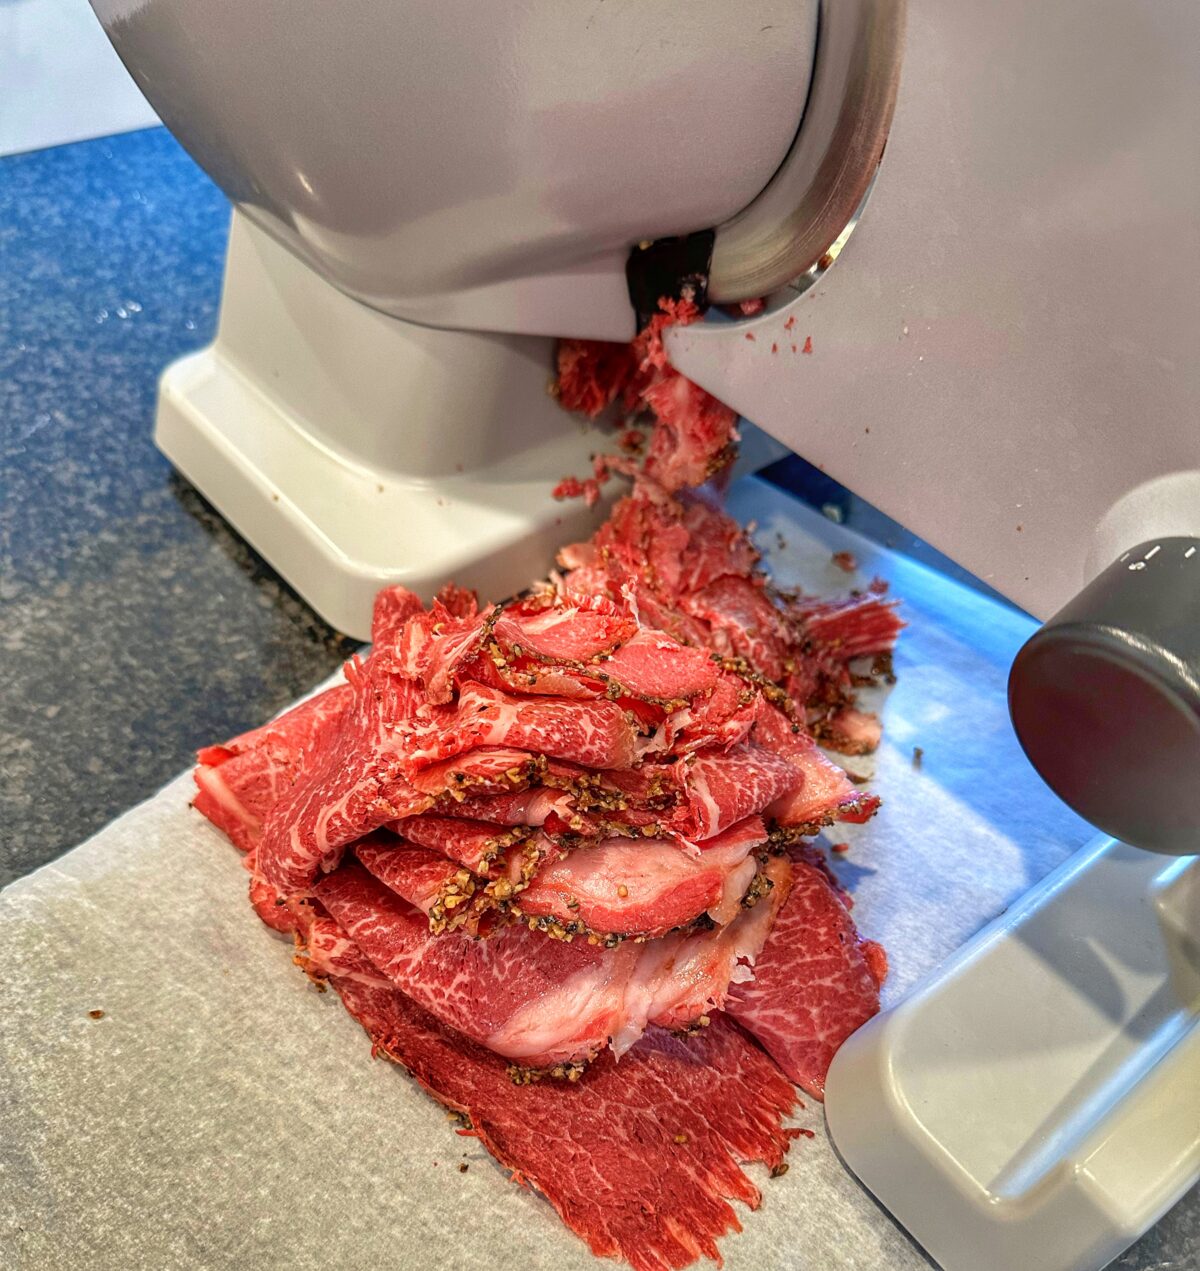 Thinly sliced corned beef on a deli slicer.